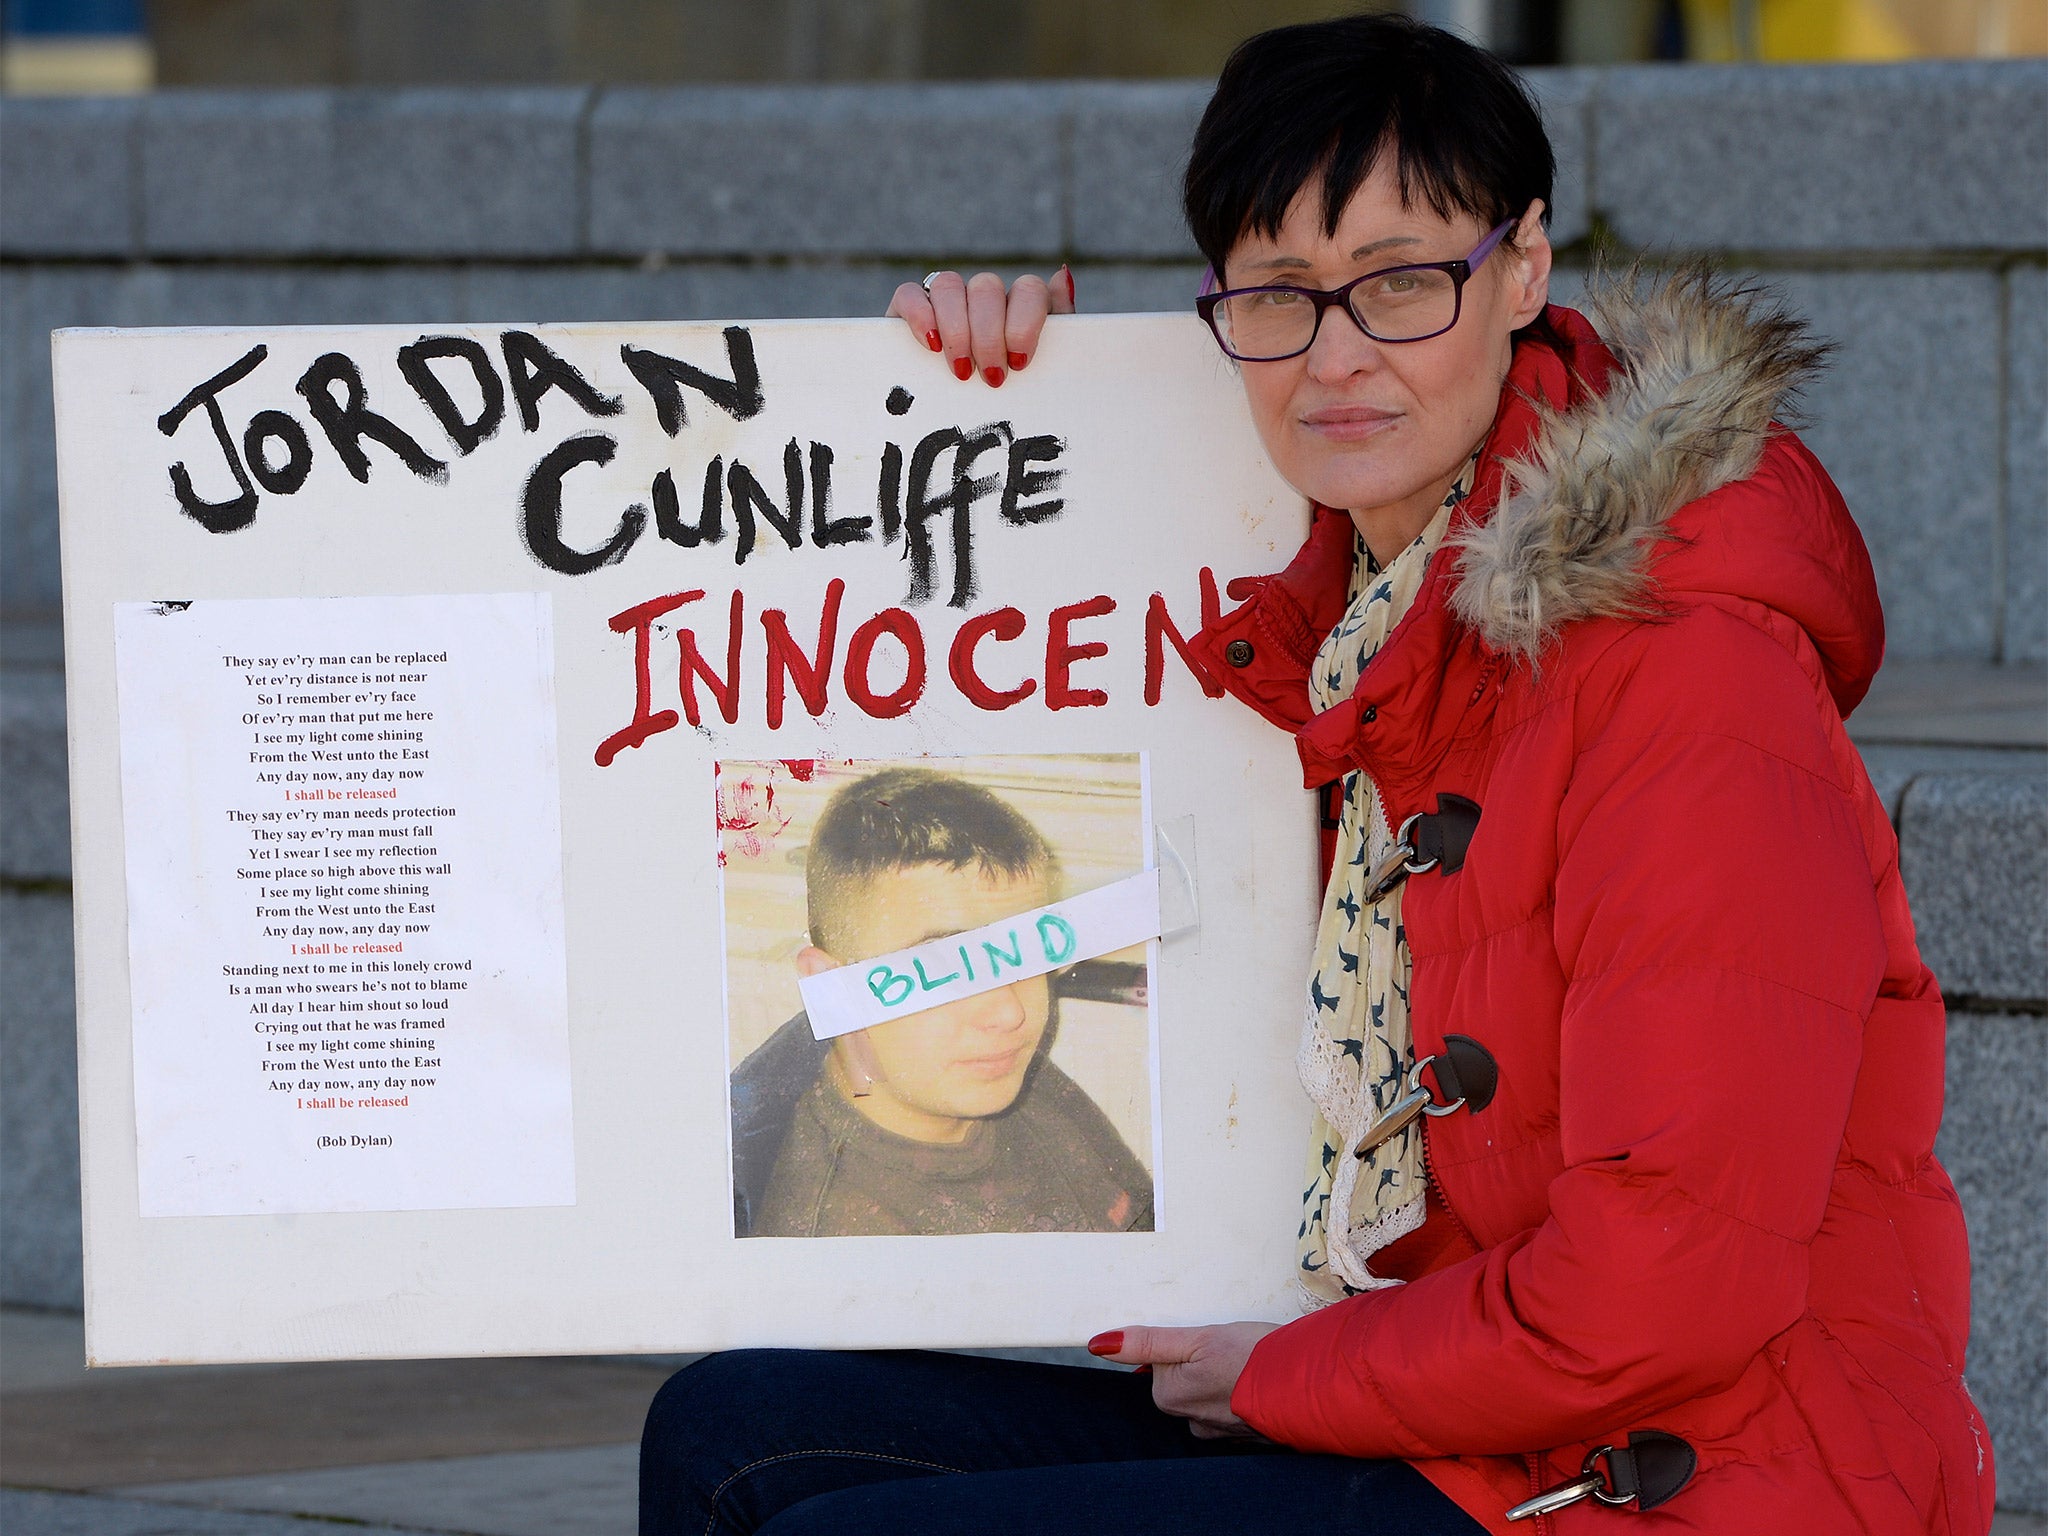 Janet Cunliffe holds a picture of Jordan during a protest in Liverpool